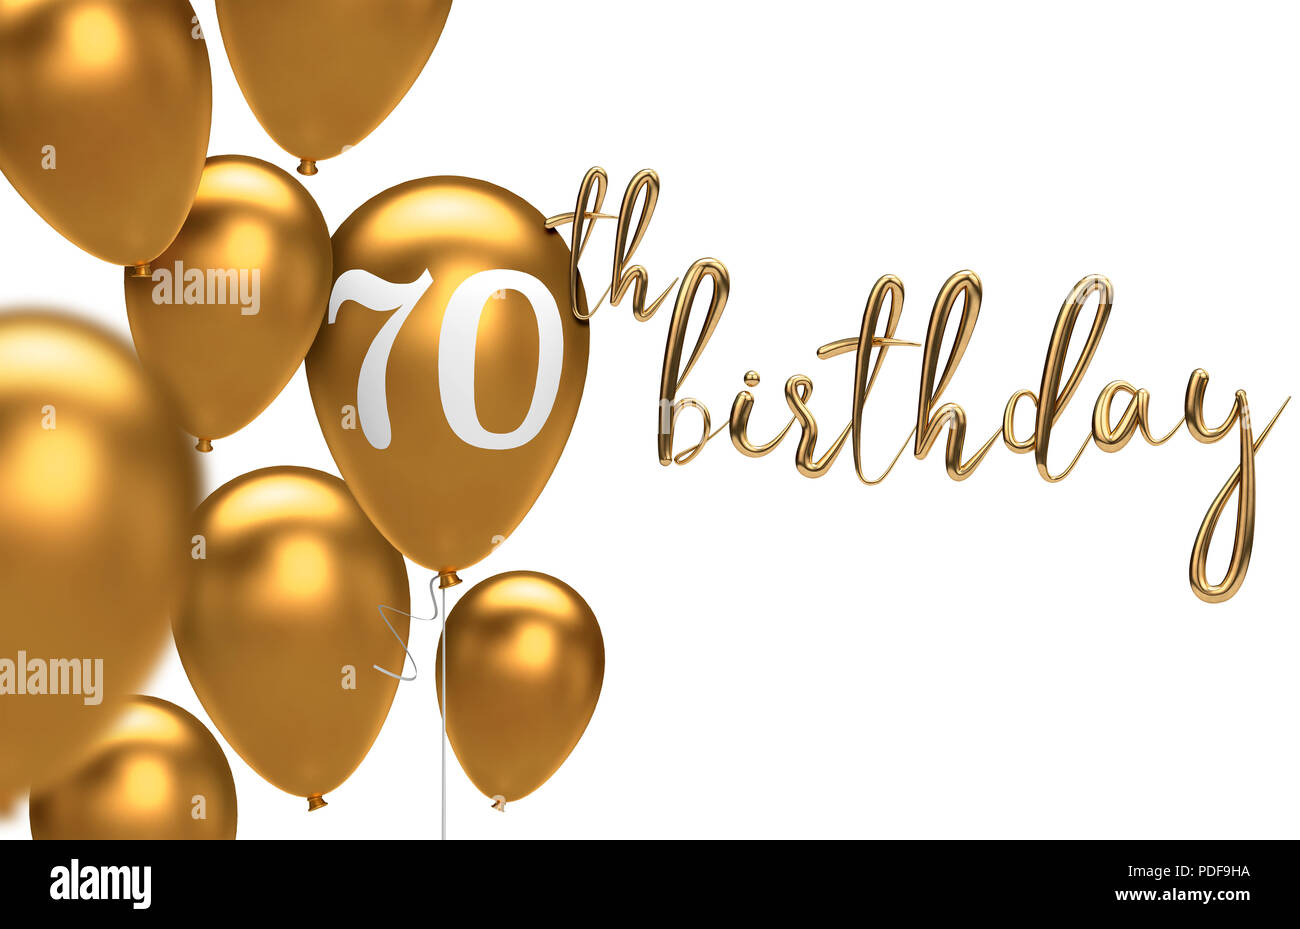 Best Collection of Background for 70th Birthday HD 4K Quality